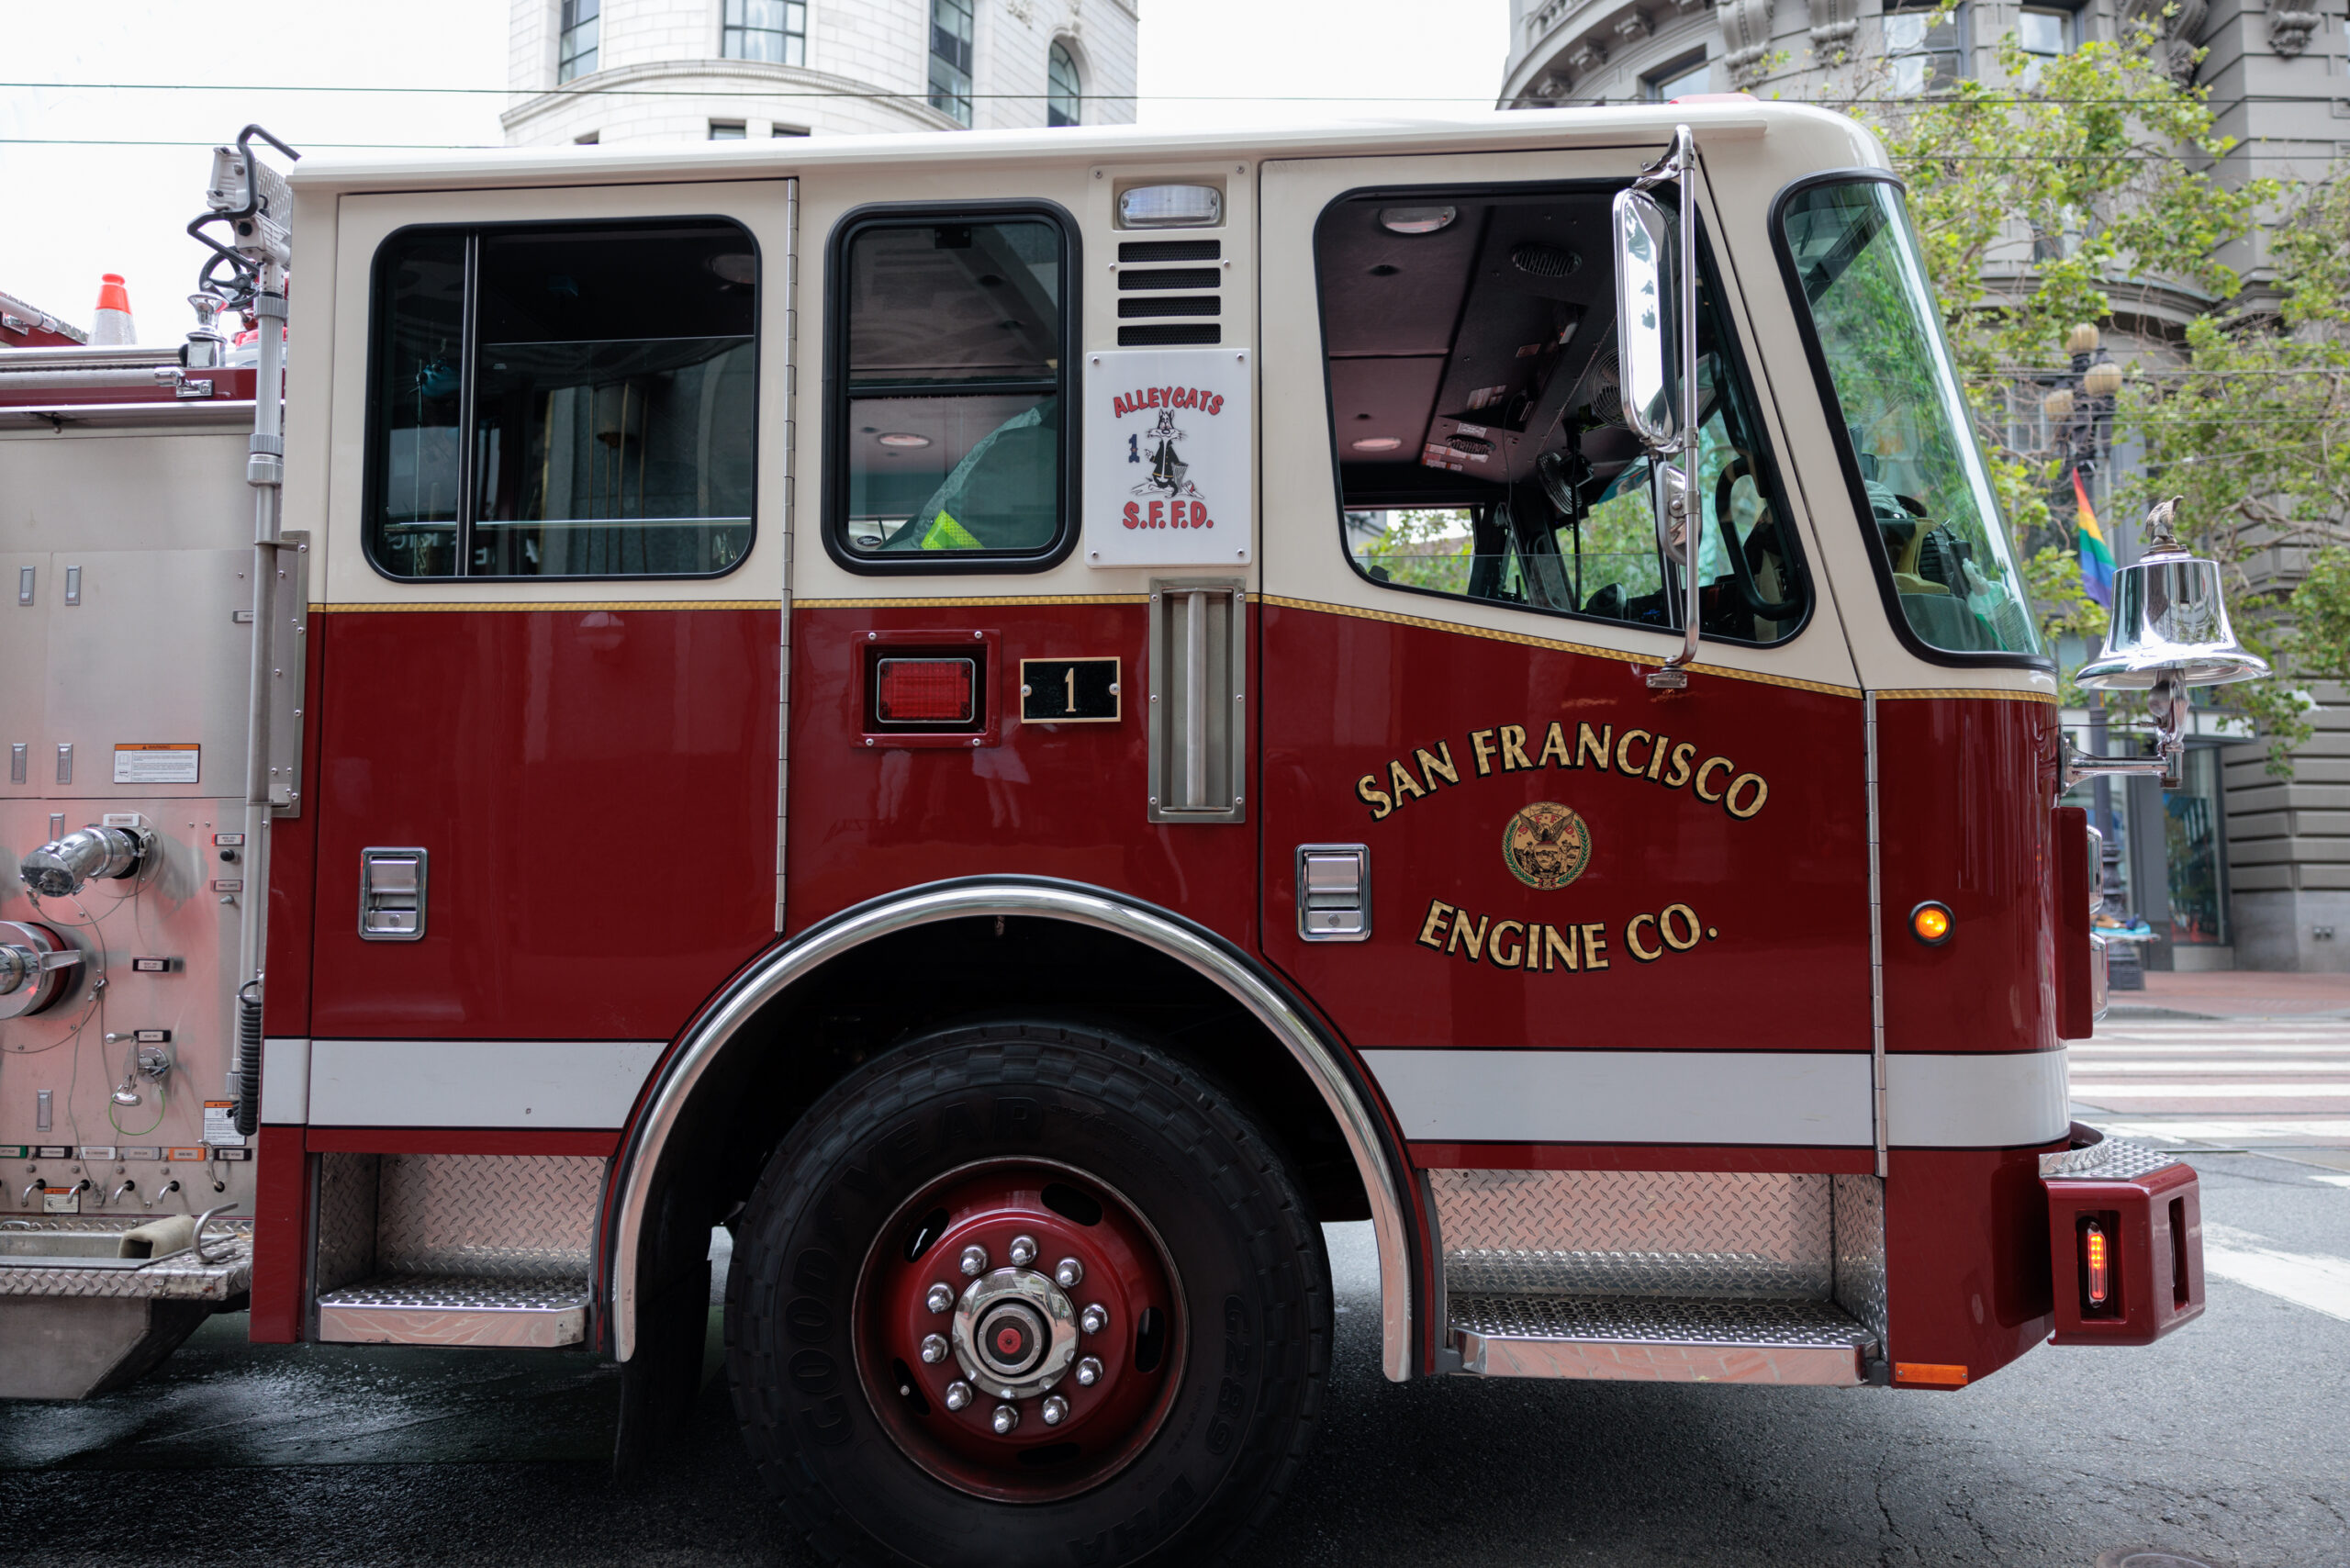 Small Craft Advisory in Effect, 12 Rescued by San Francisco Firefighters and Coast Guard